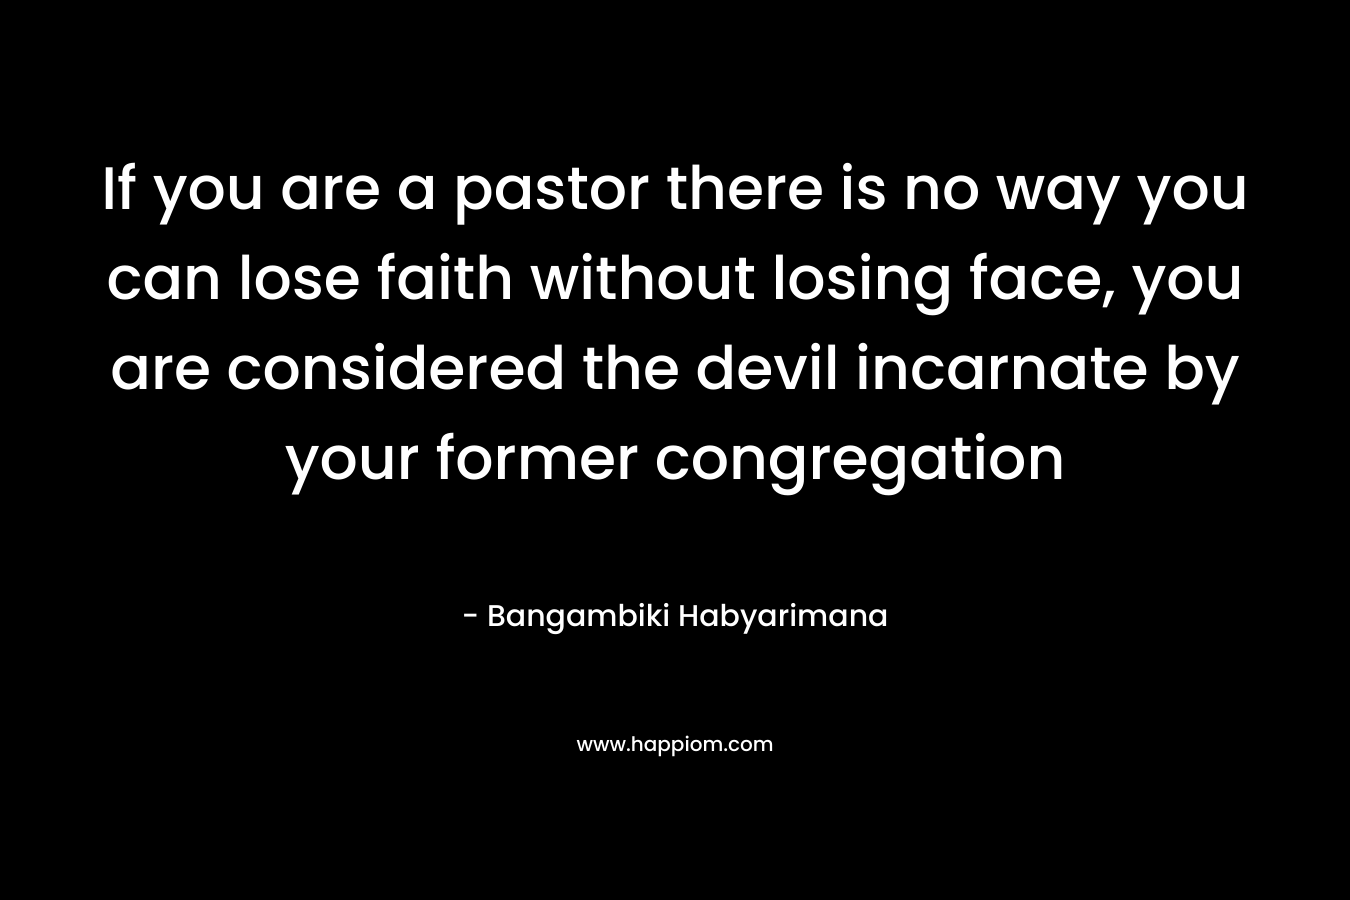 If you are a pastor there is no way you can lose faith without losing face, you are considered the devil incarnate by your former congregation